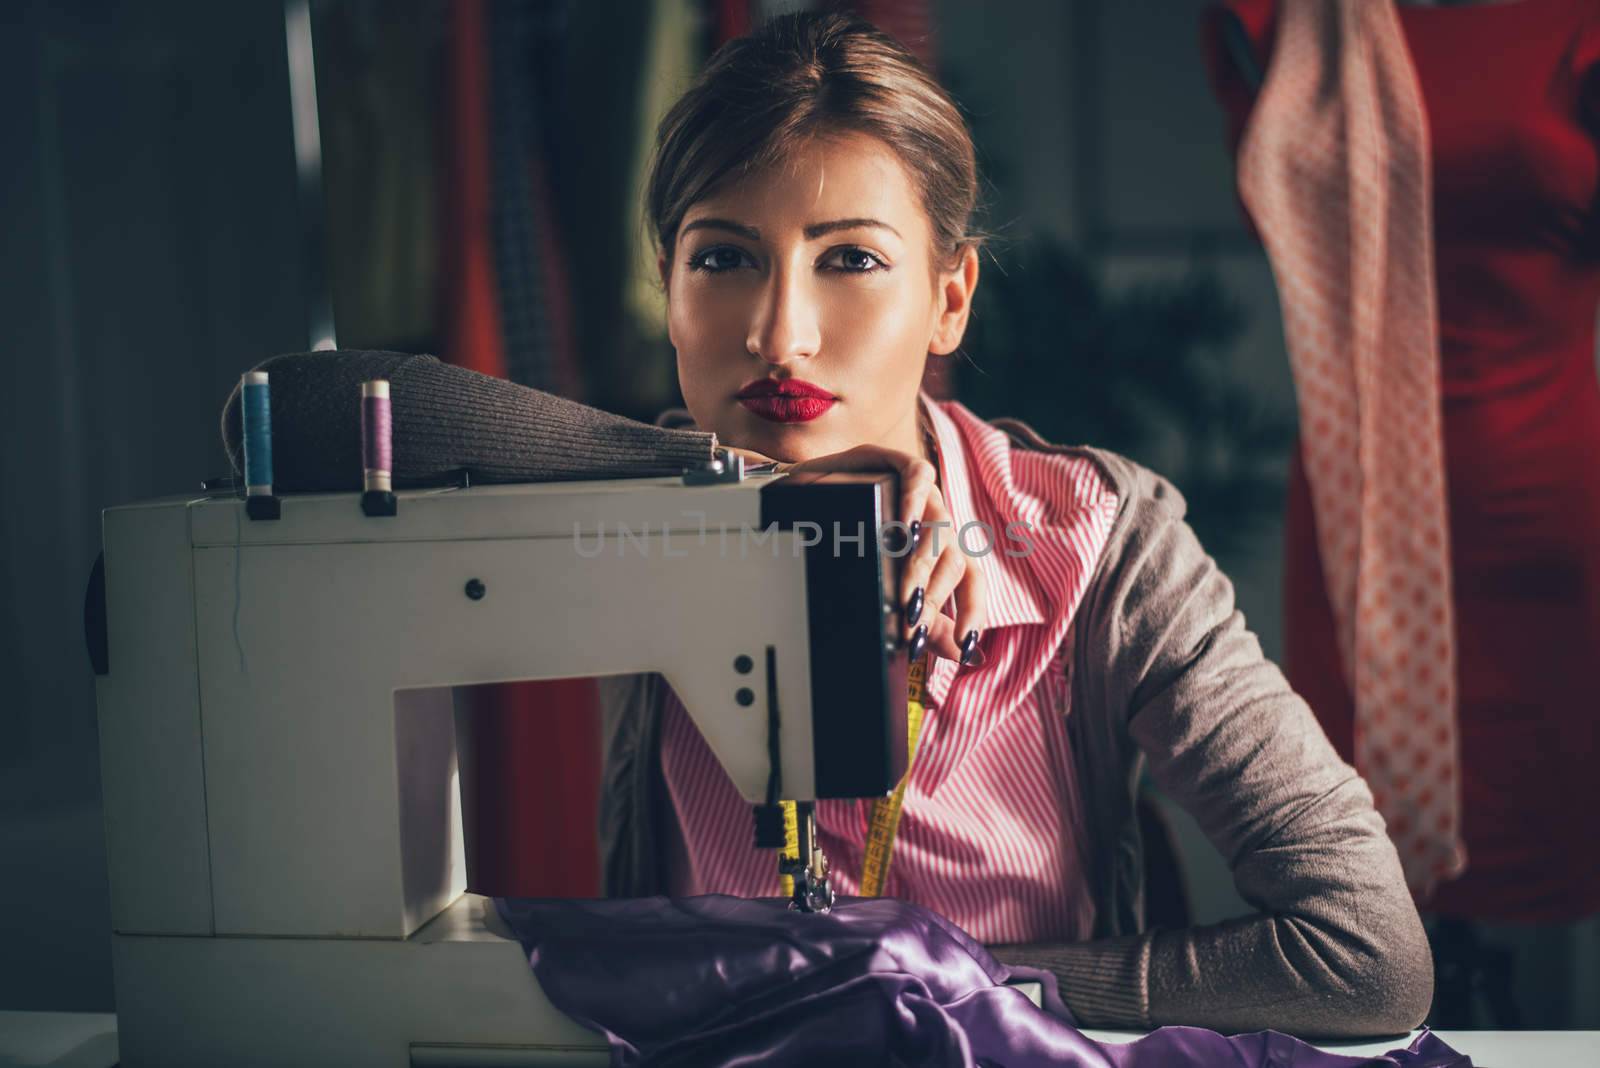 Beautiful tired woman sits in front of the sewing machine and thinking. Looking at camera. Vintage concept.